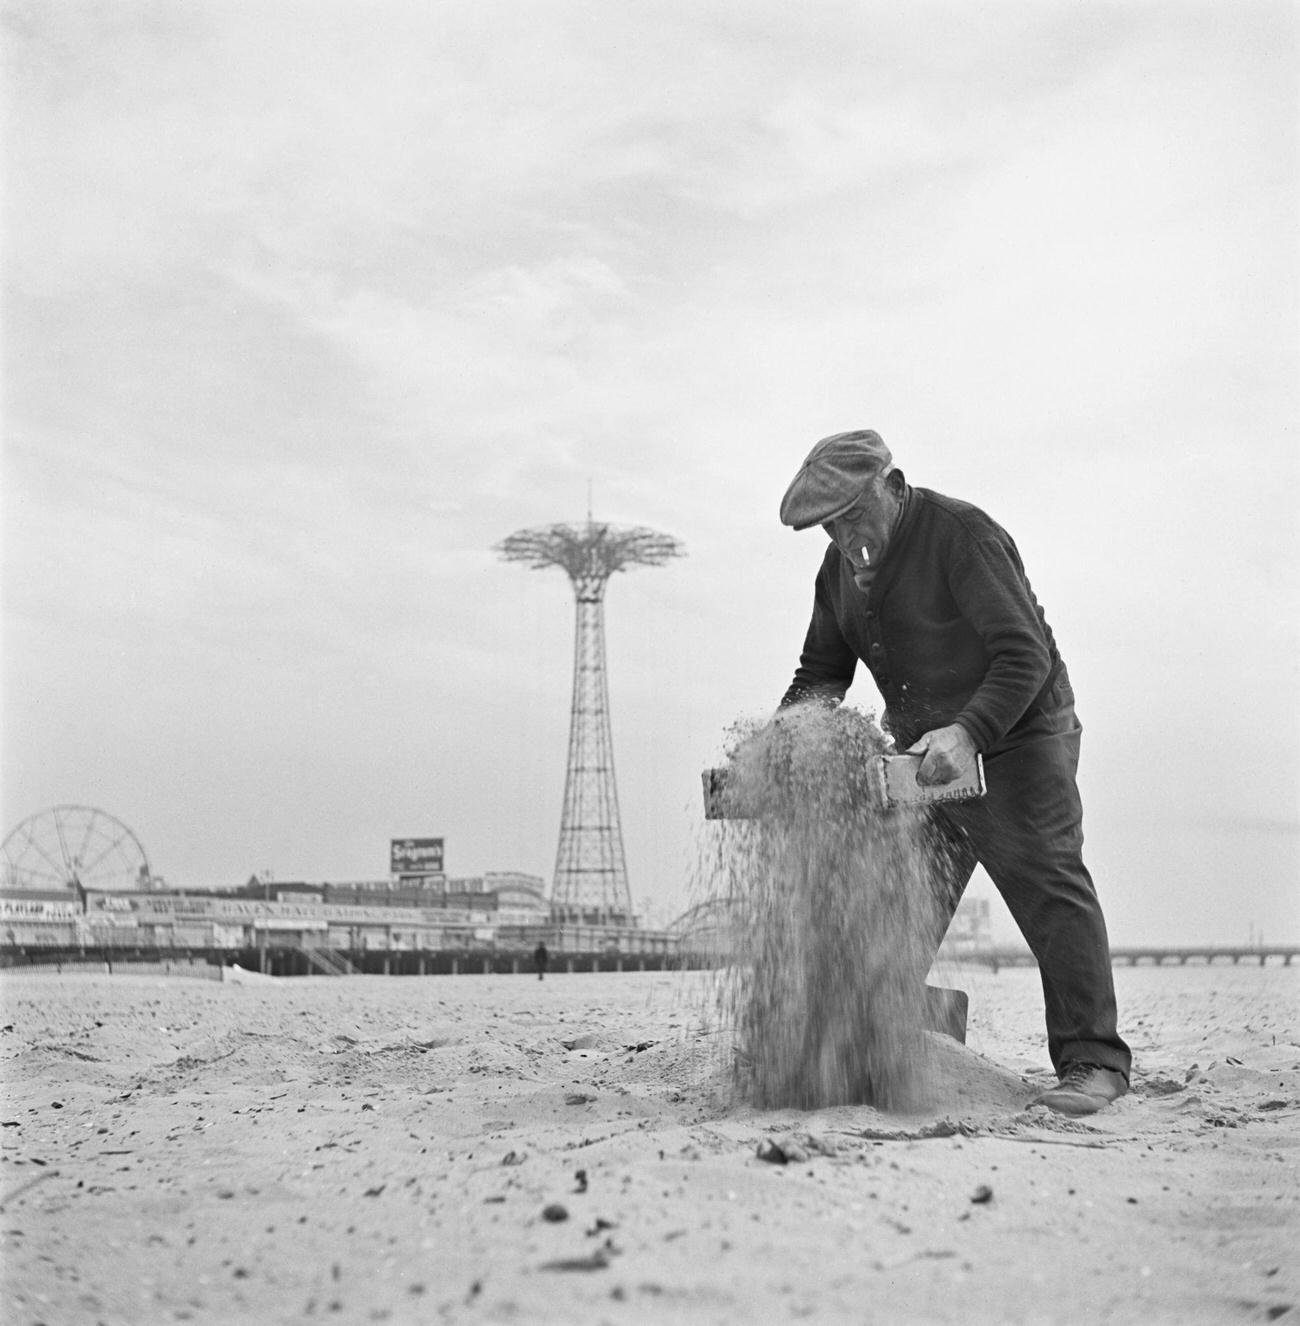 Beachcomber Searching For Valuables On Coney Island Beach, Brooklyn, 1950.